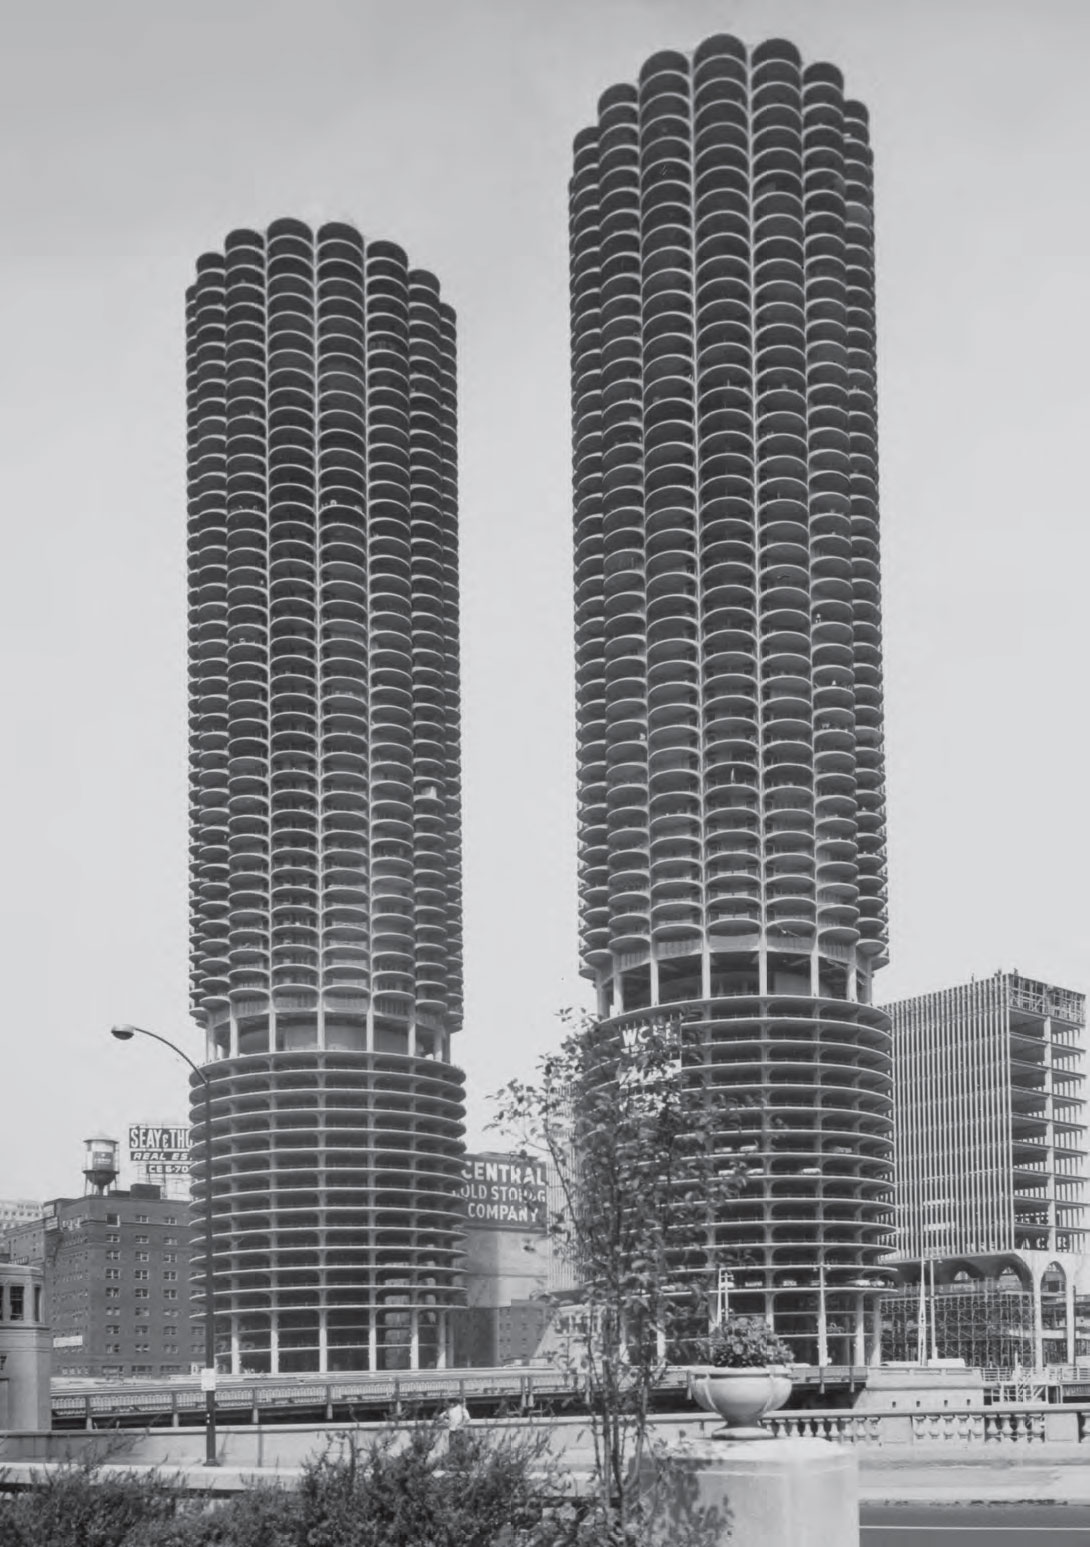 Marina City, Chicago by Bertrand Goldberg, as reproduced in Atlas of Brutalist Architecture